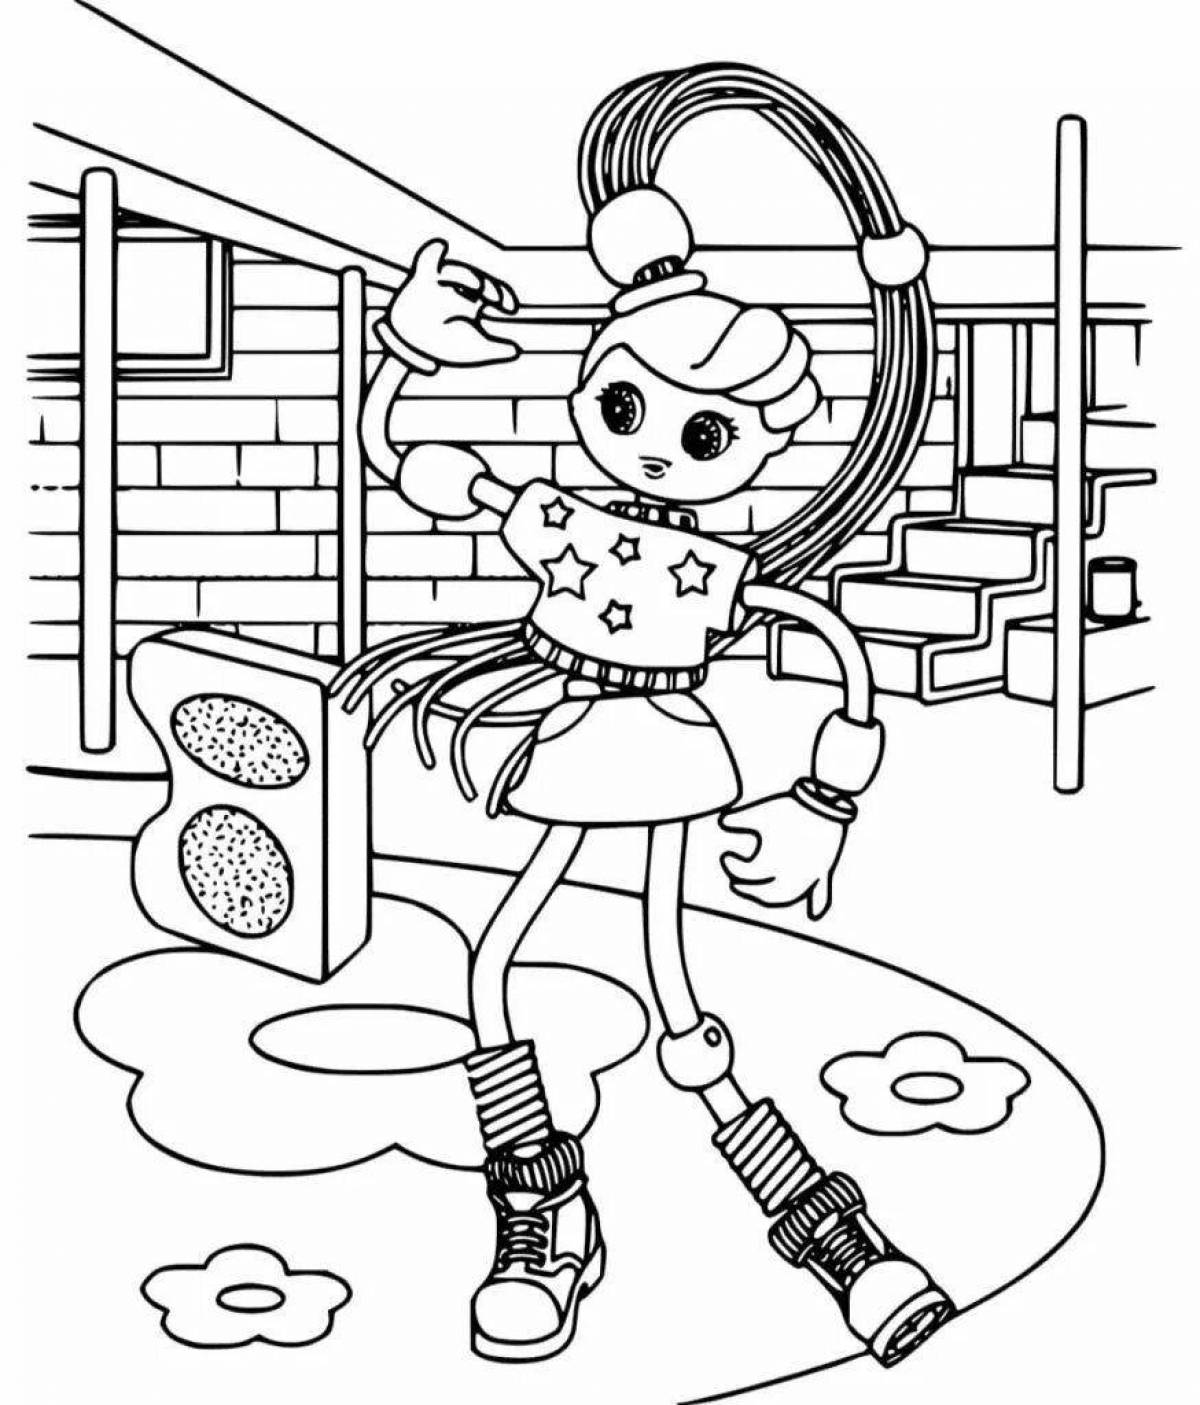 Betty's adorable spiral coloring book